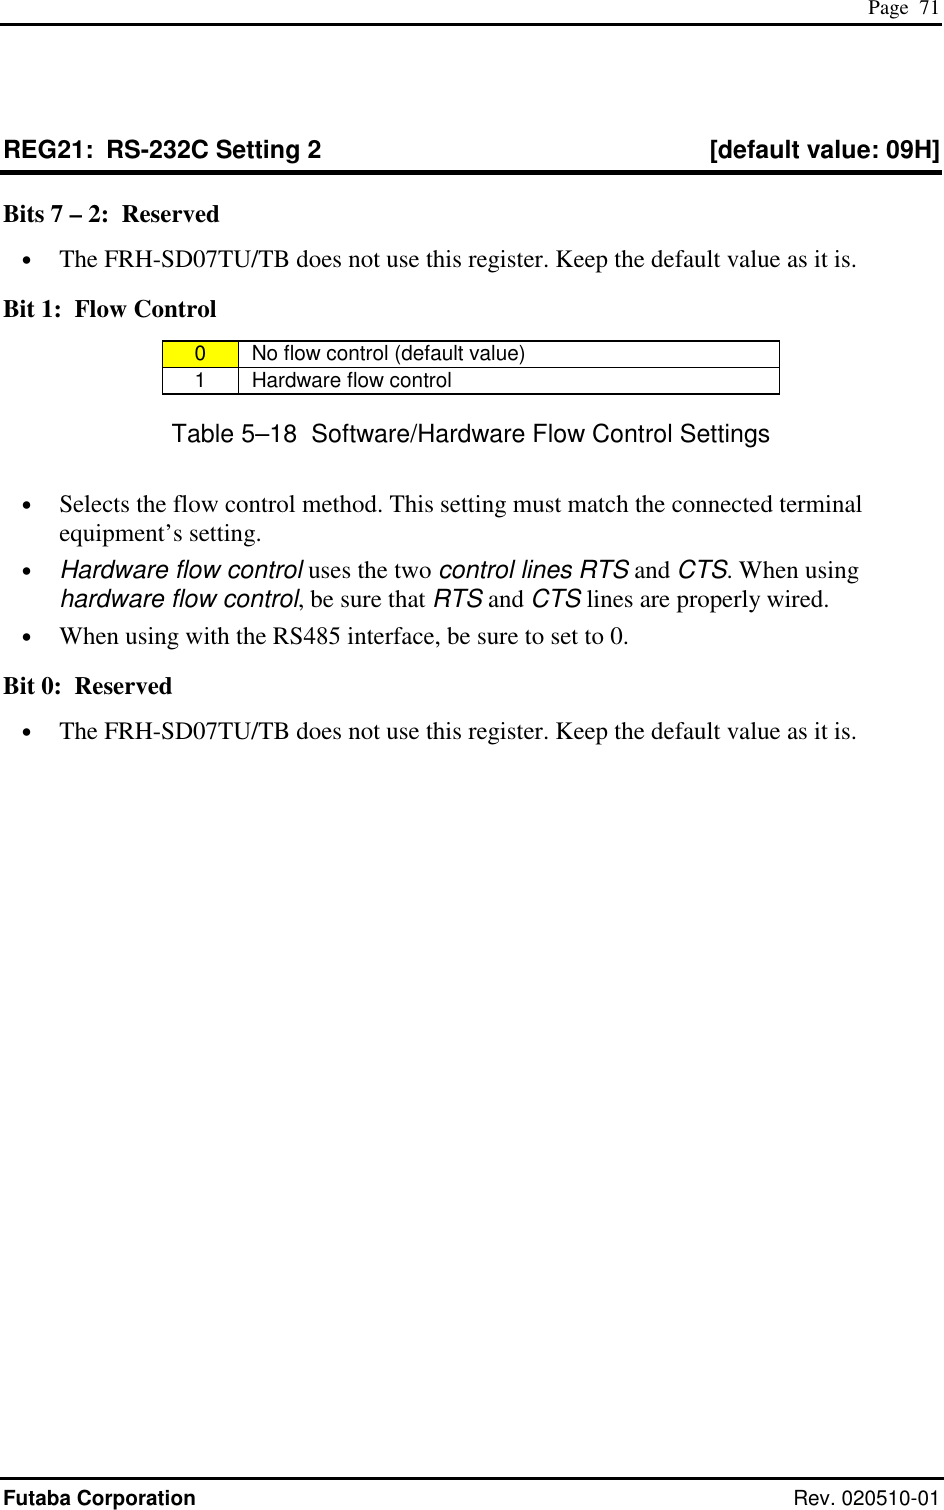  Page  71 Futaba Corporation Rev. 020510-01 REG21:  RS-232C Setting 2  [default value: 09H] Bits 7 – 2:  Reserved •  The FRH-SD07TU/TB does not use this register. Keep the default value as it is. Bit 1:  Flow Control 0   No flow control (default value) 1   Hardware flow control Table 5–18  Software/Hardware Flow Control Settings •  Selects the flow control method. This setting must match the connected terminal equipment’s setting. •  Hardware flow control uses the two control lines RTS and CTS. When using hardware flow control, be sure that RTS and CTS lines are properly wired. •  When using with the RS485 interface, be sure to set to 0. Bit 0:  Reserved •  The FRH-SD07TU/TB does not use this register. Keep the default value as it is. 